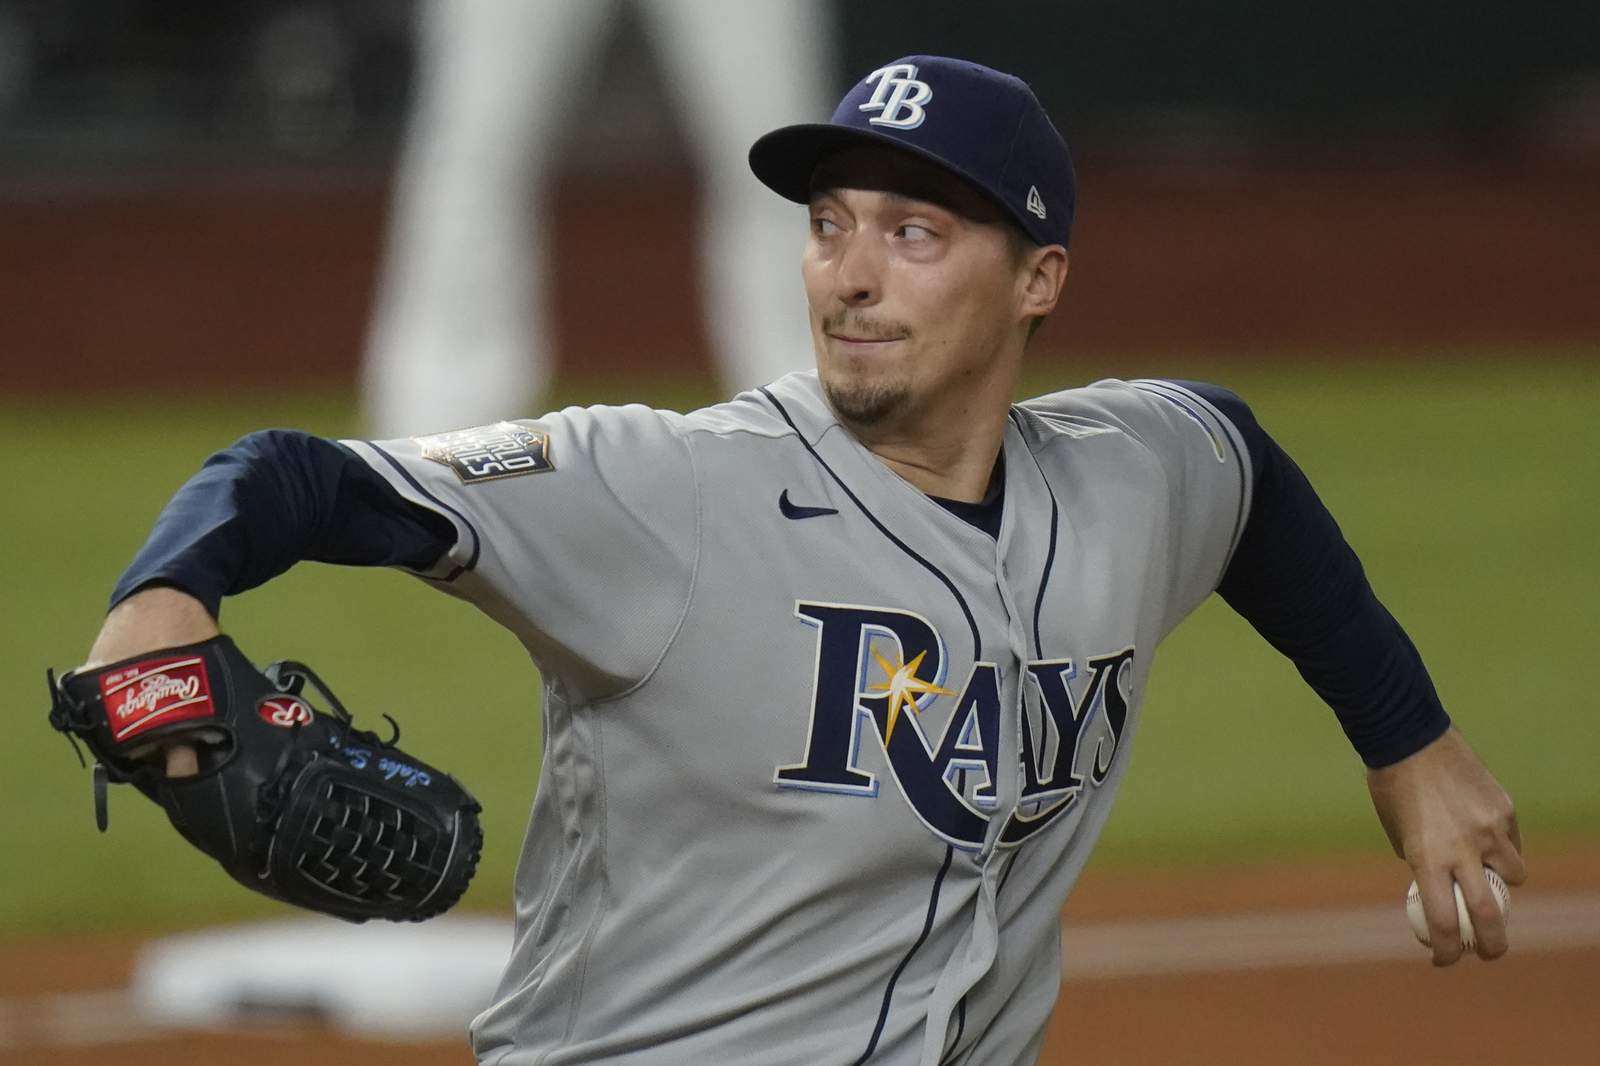 World Series Notebook: Rays enjoying playing with fans again